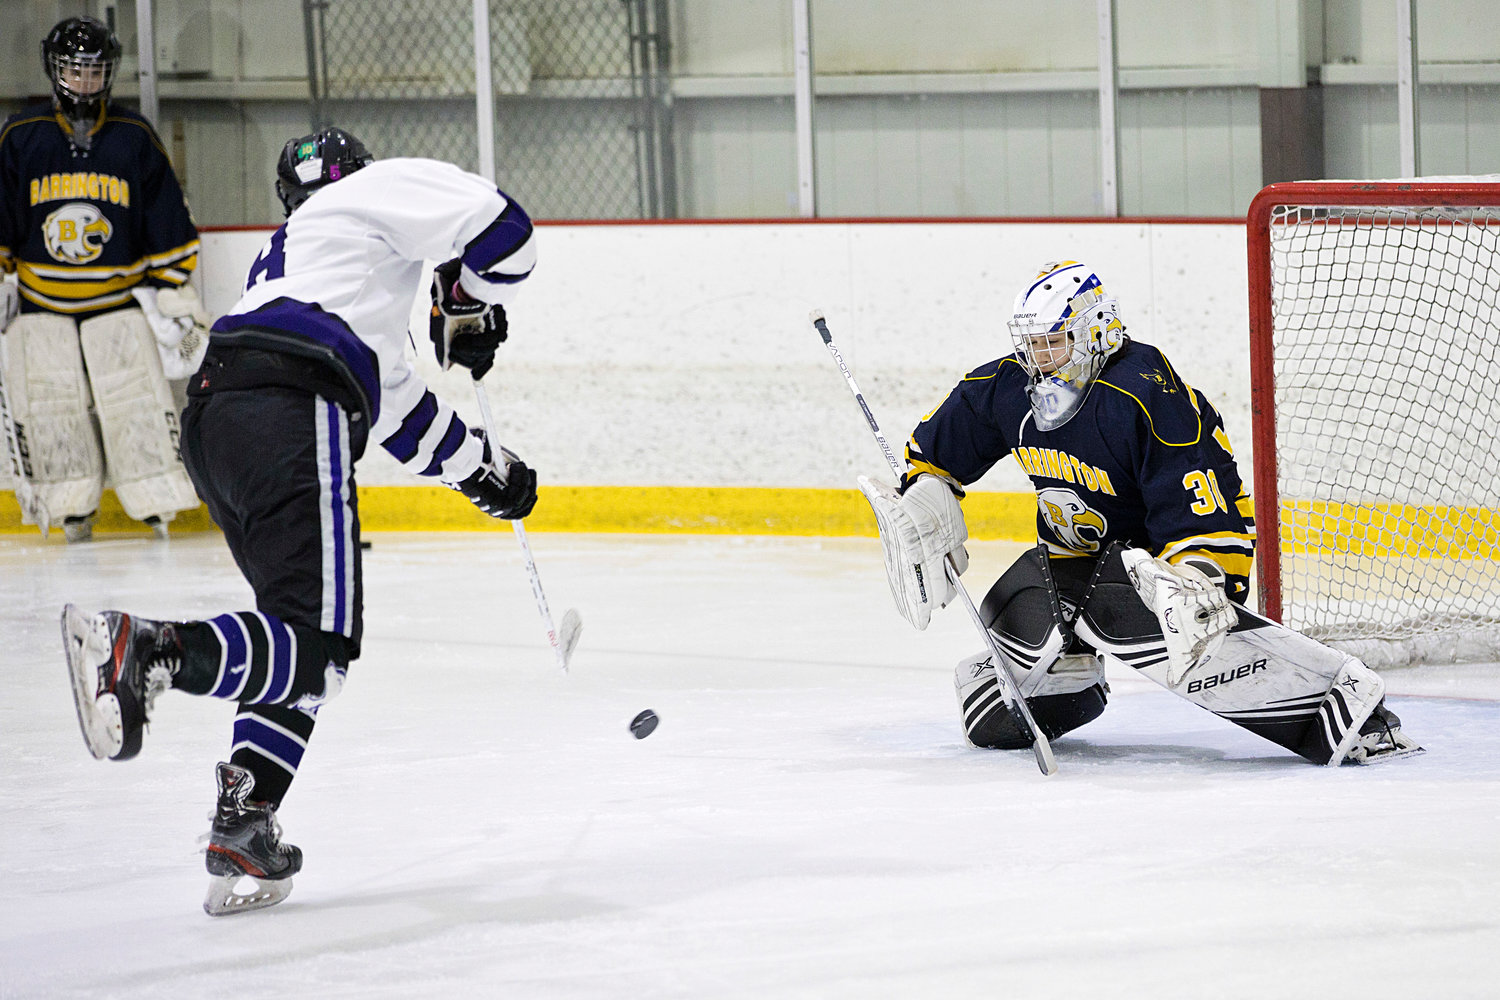 Oliver Browne fires a shot toward Barrington's Dominic Bruzzi while competing in a shootout.